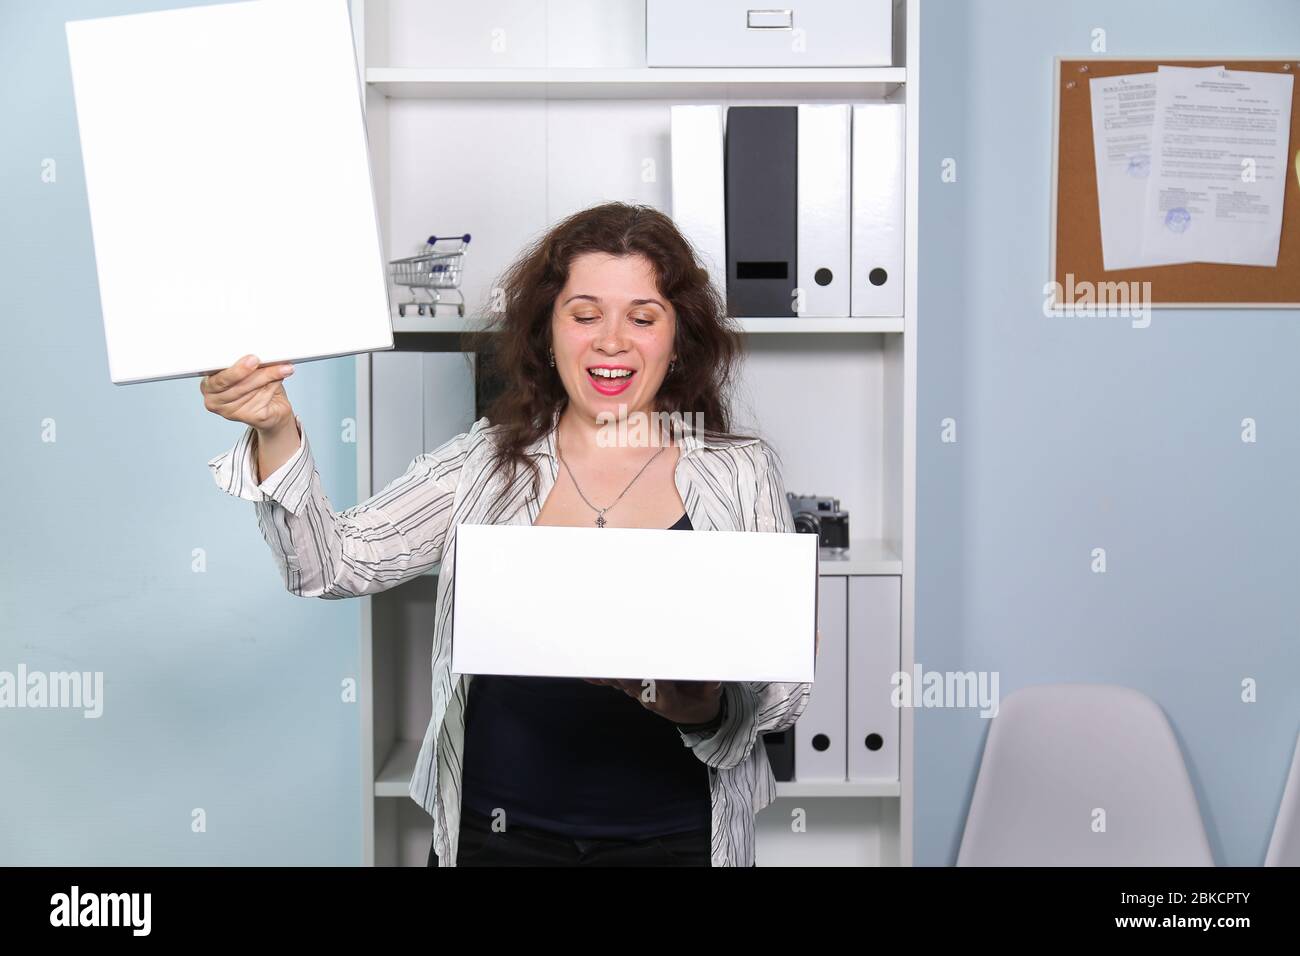 Concept of dismissal from work. Happy woman with carton box with her stationery stuff, girl was fired from her job. Stock Photo